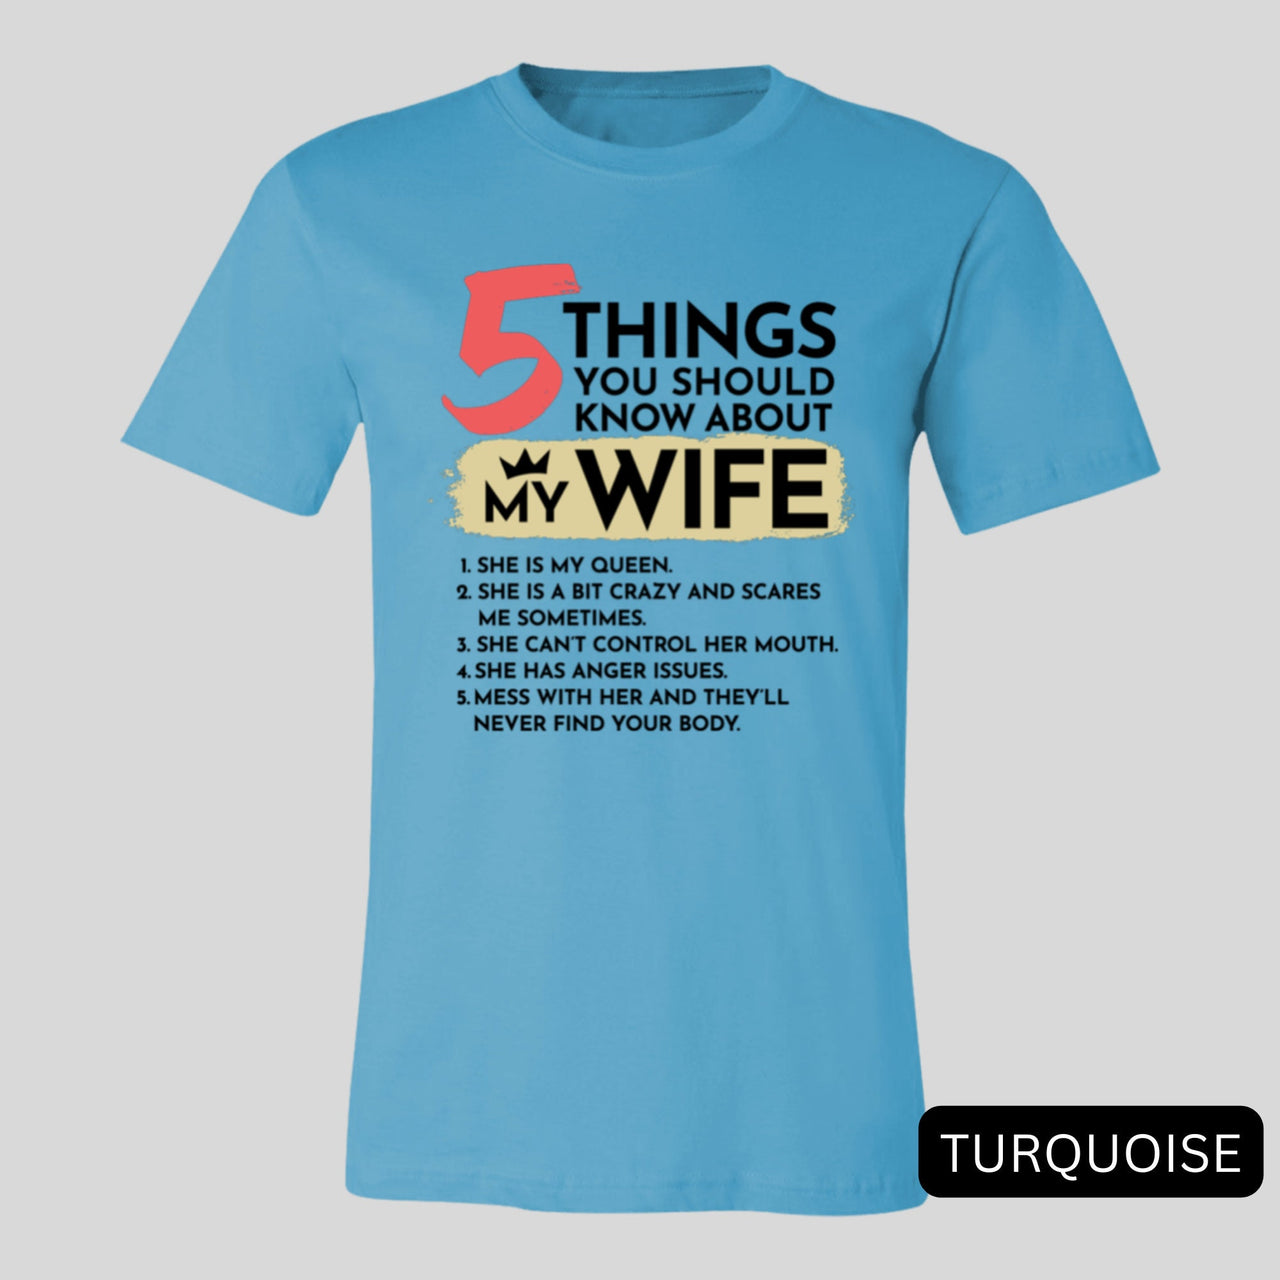 5 Things You Should Know About My Wife Tee